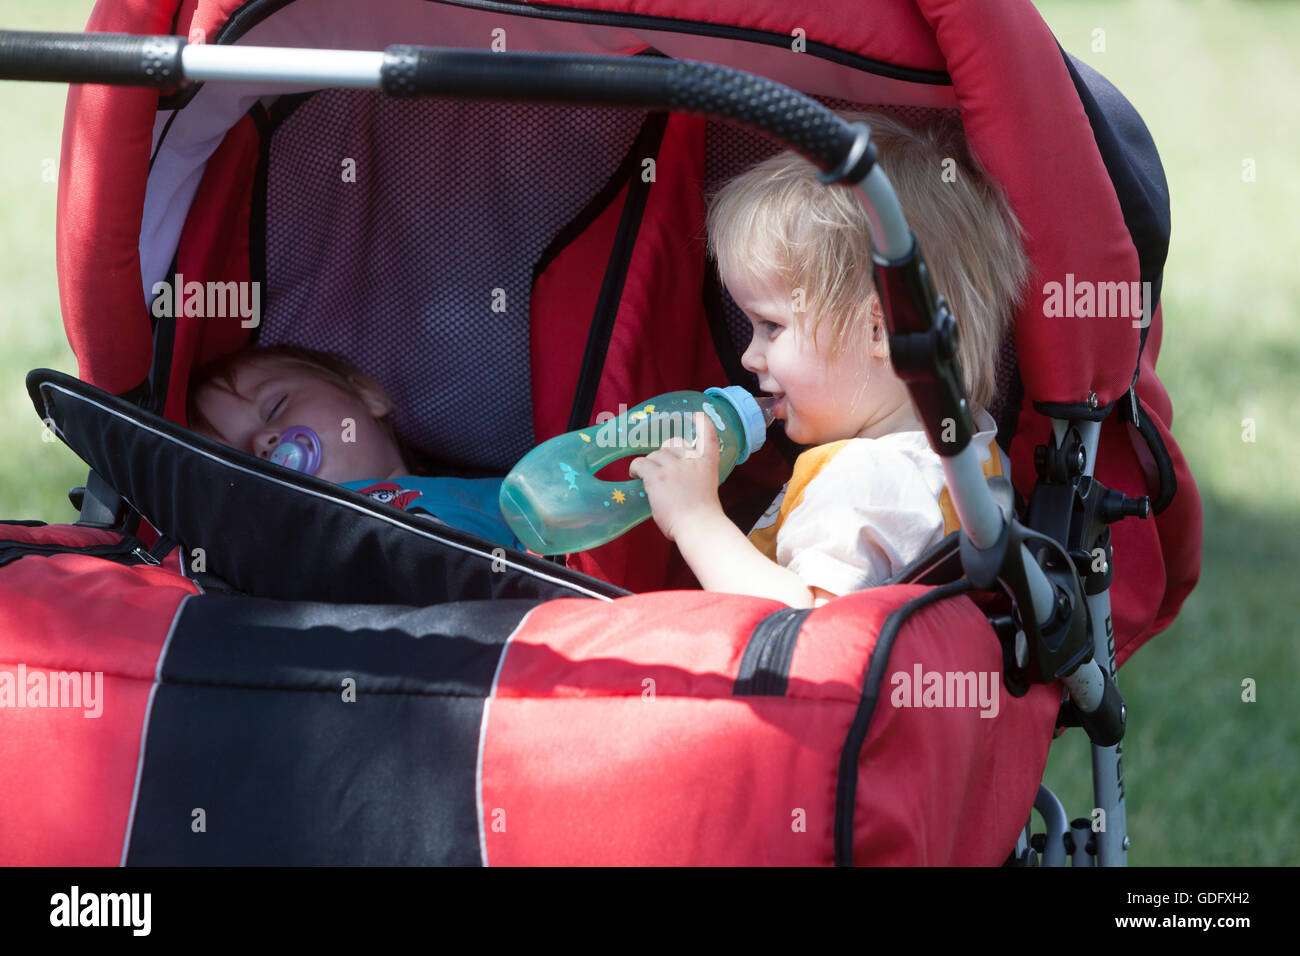 Child twins  in a stroller, summer Stock Photo